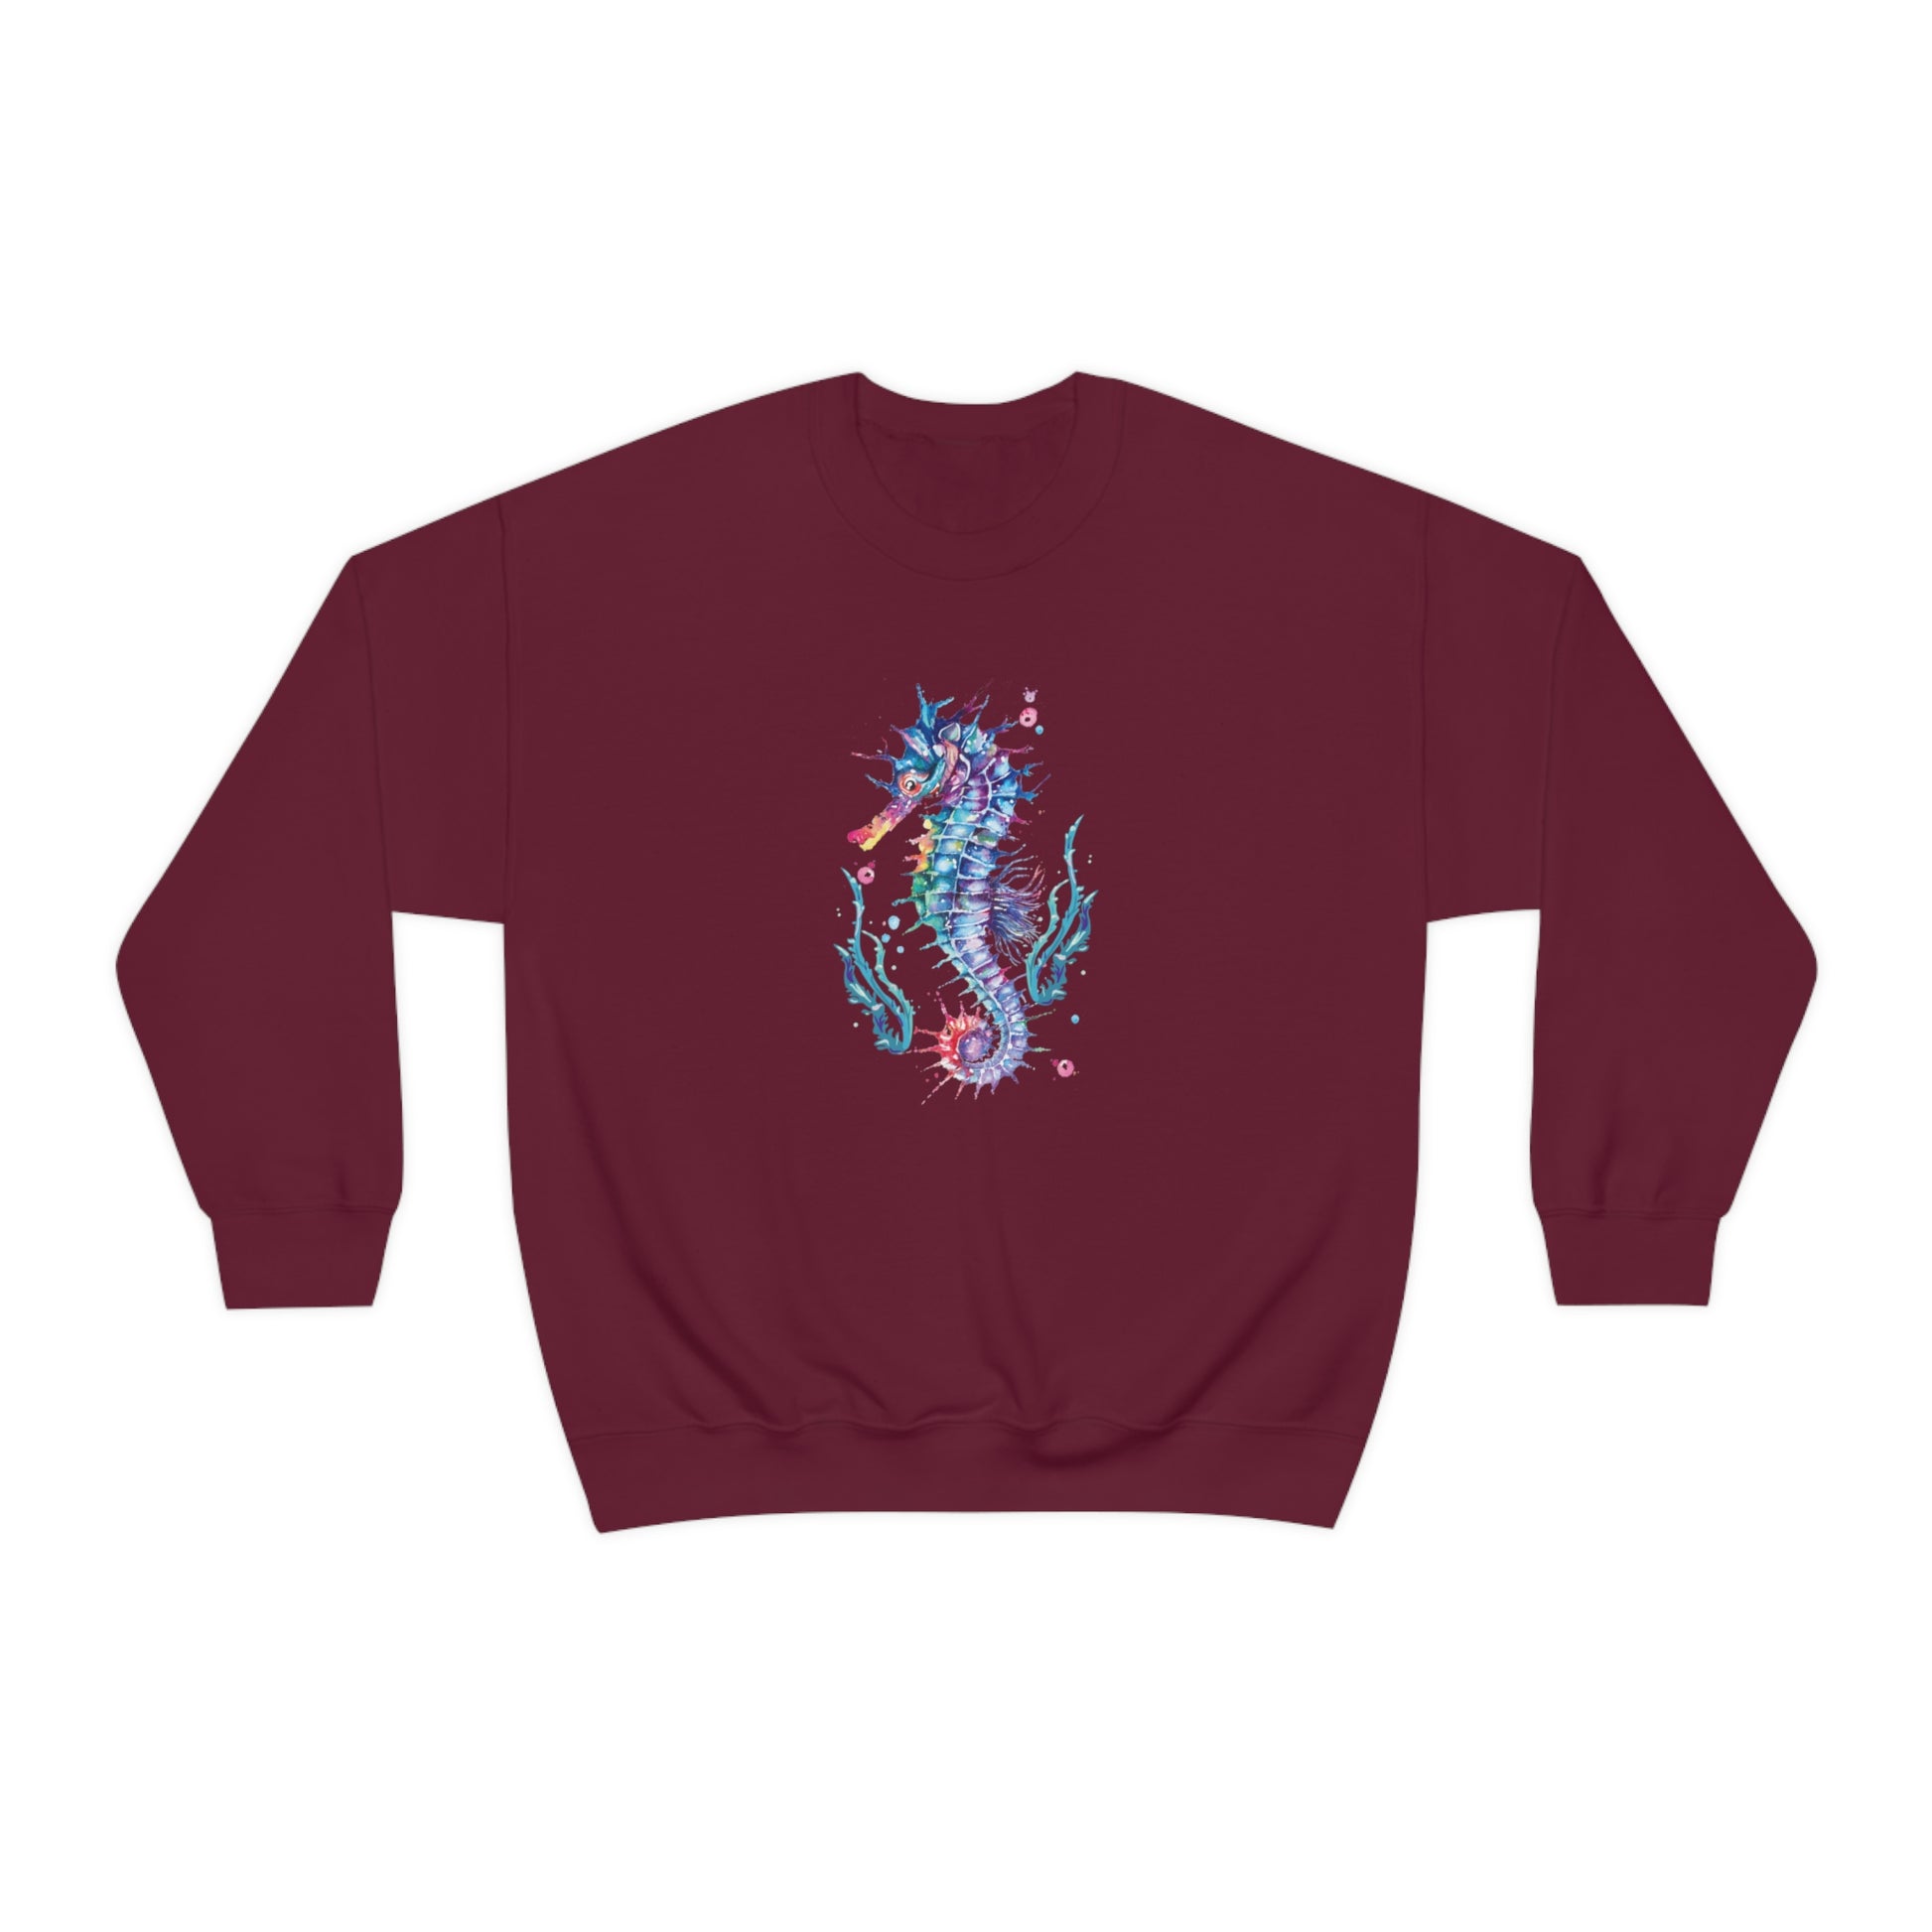 Flat front view of the Maroon shirt